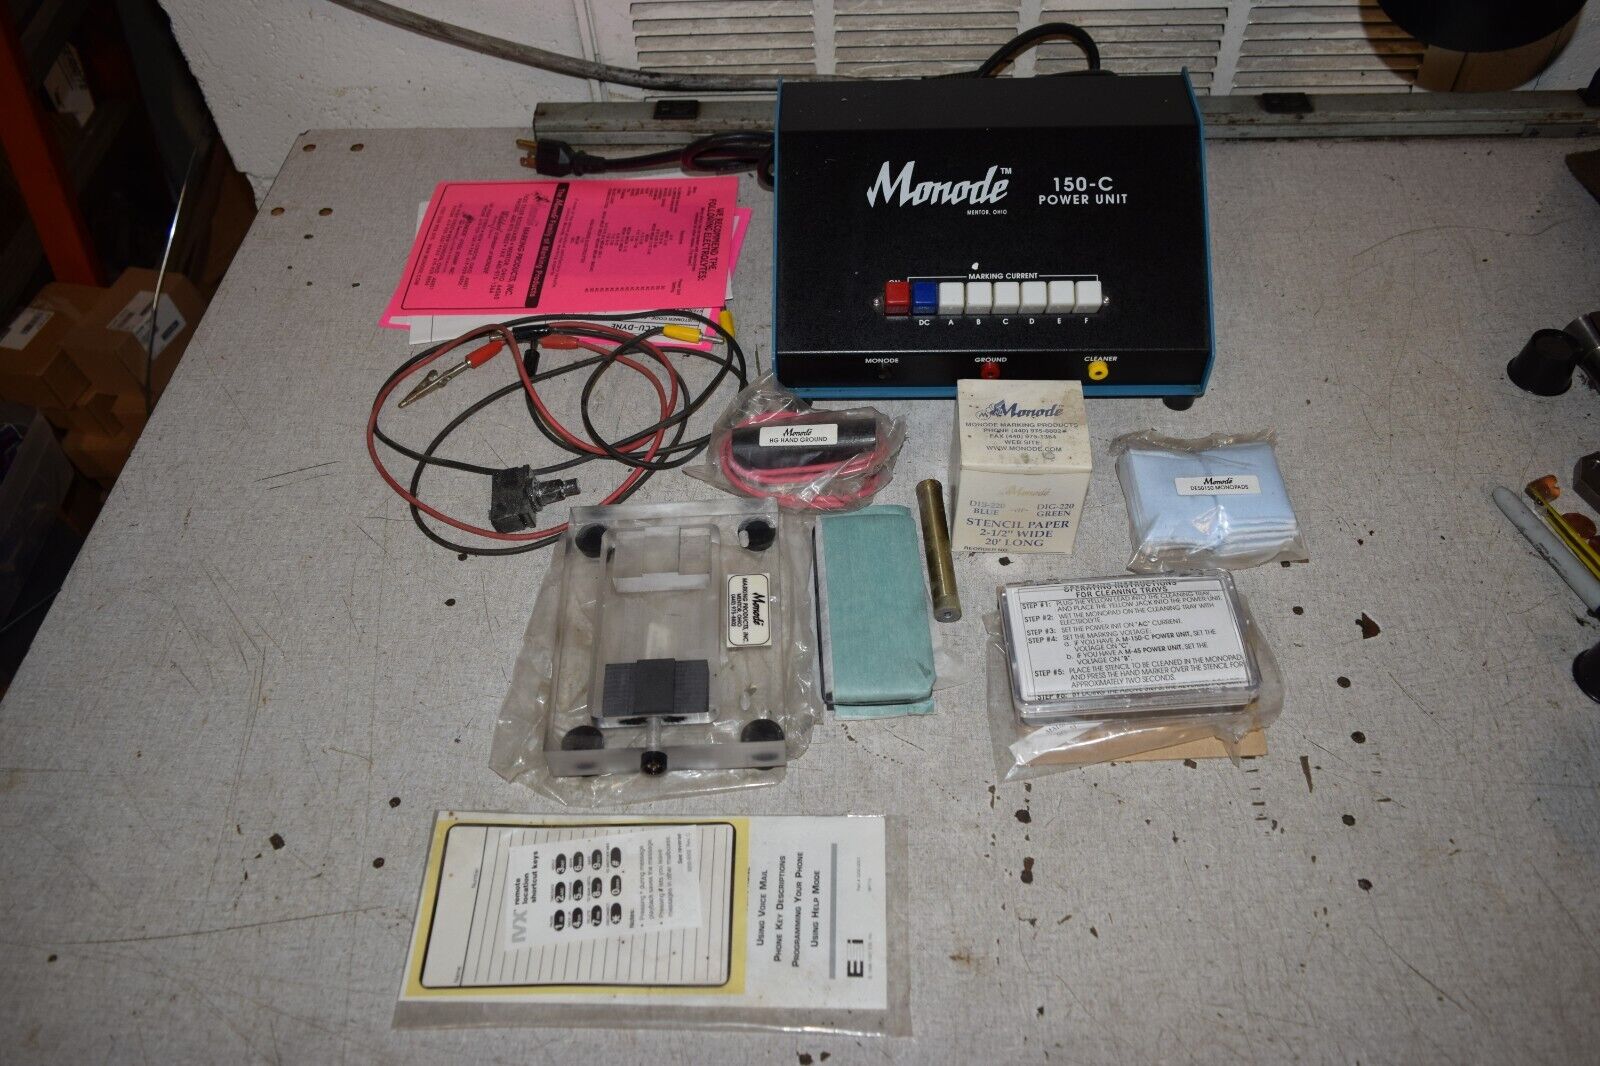 Monode Marking 150-C Power Unit with Accessories